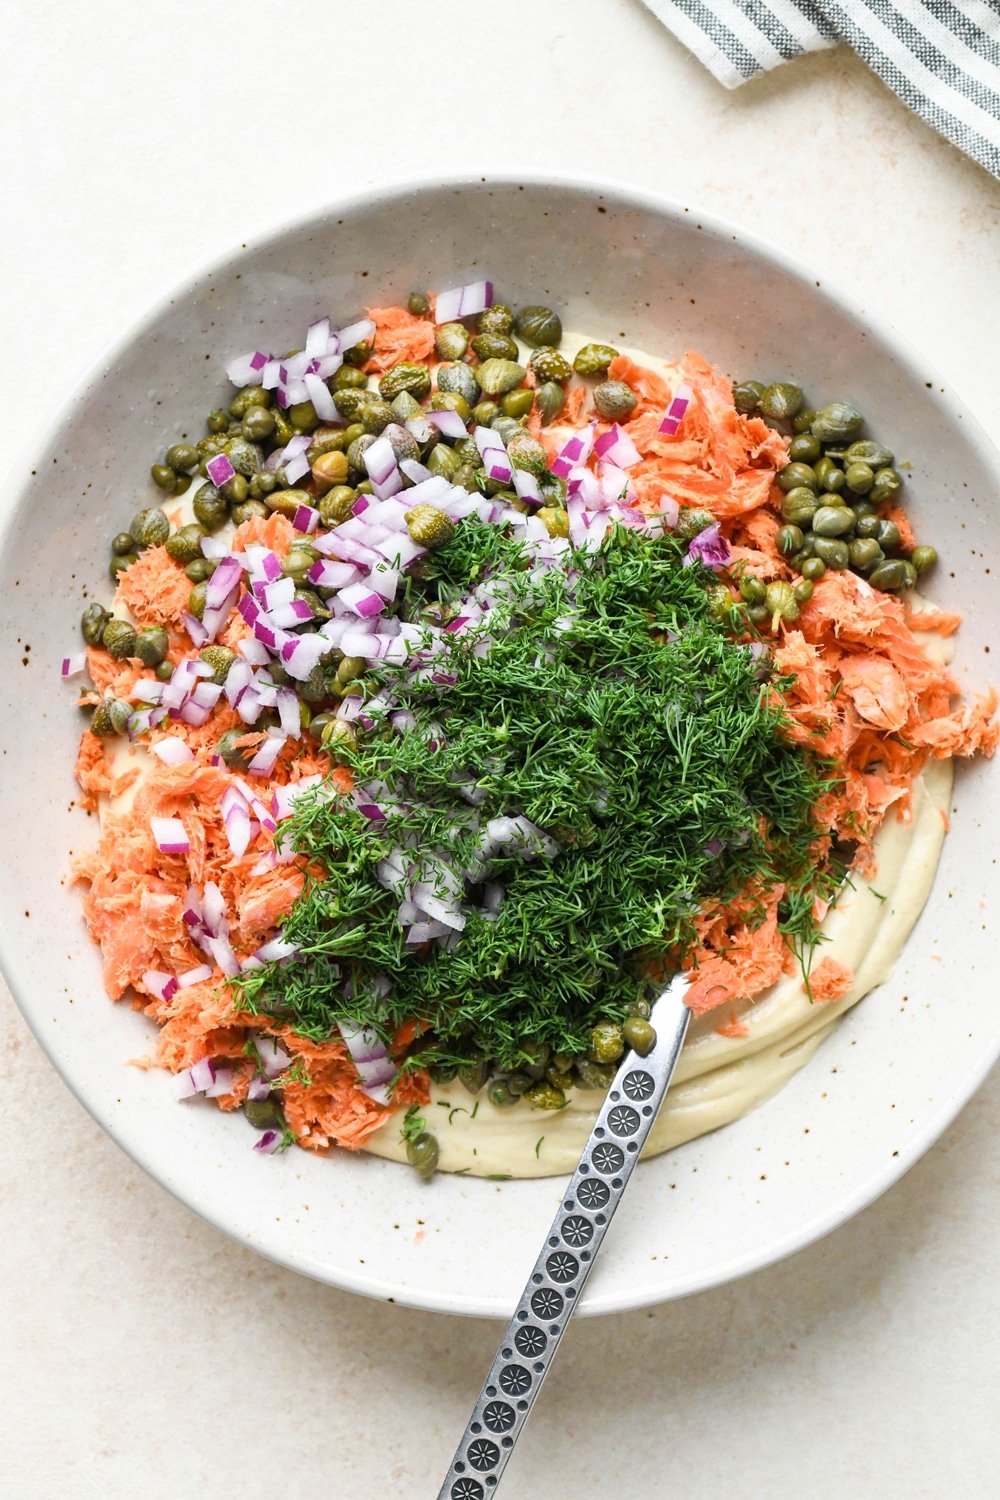 How to make dairy free smoked salmon dip: Smoked salmon, red onion, dill, and capers added to the cashew cream base.